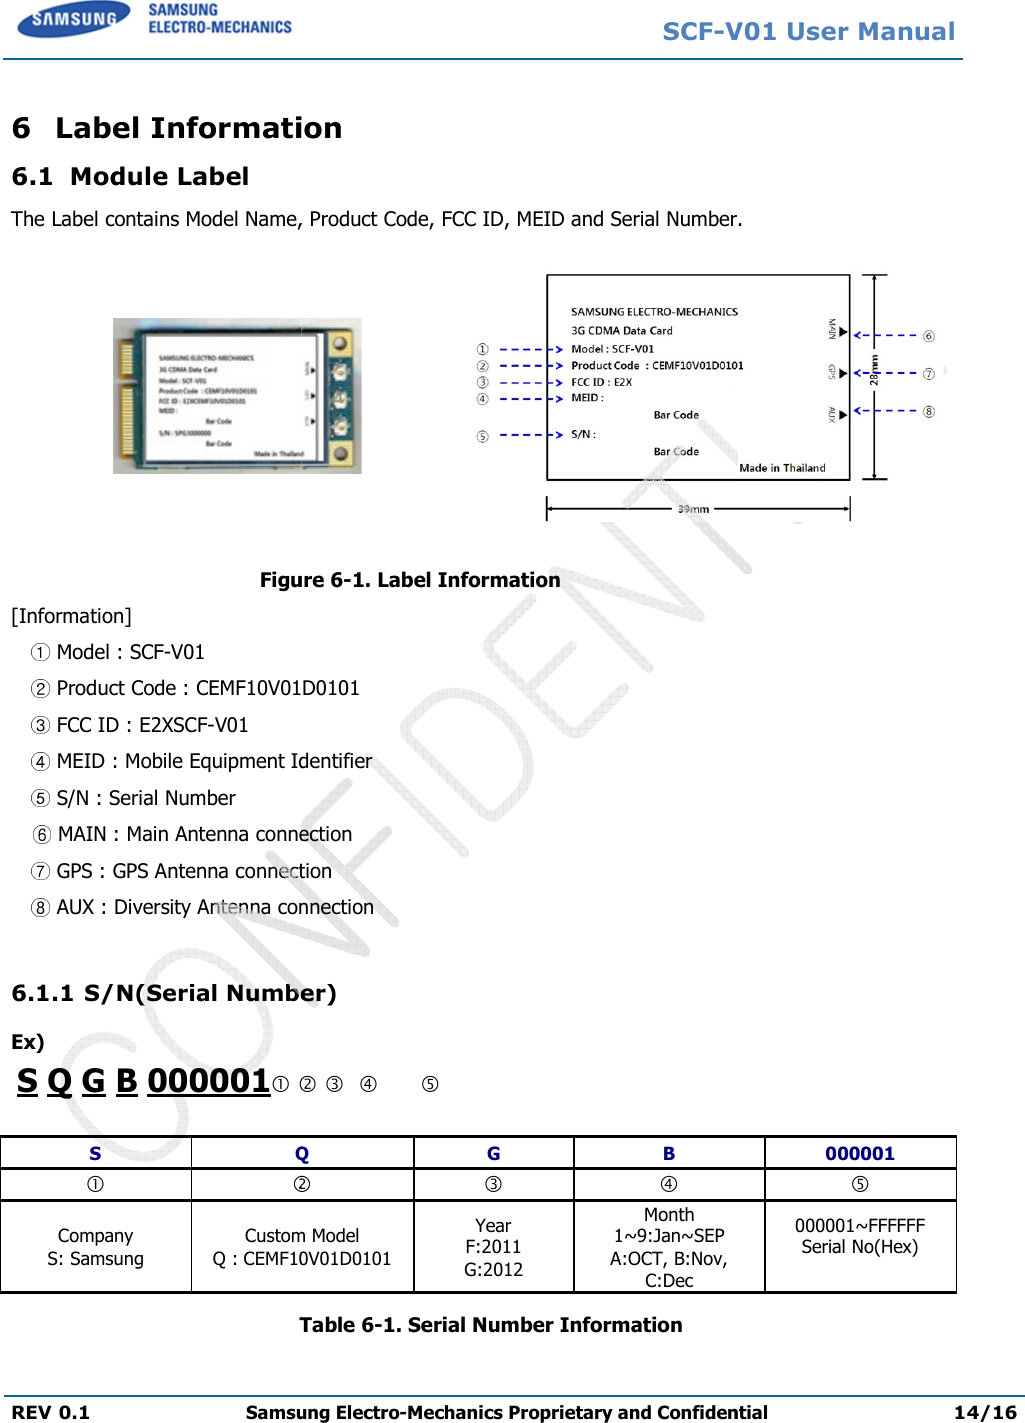   REV 0.1 Samsung Electro 6 Label Information6.1 Module Label The Label contains Model Name, Product Code, FCC ID, MEID and Serial Number.                                                      Figure[Information]      Model : SCF-V01      Product Code : CEMF10V01D0101     FCC ID : E2XSCF-V01      MEID : Mobile Equipment Id     S/N : Serial Number  MAIN : Main Antenna connection     GPS : GPS Antenna connection     AUX : Diversity Antenna connection 6.1.1 S/N(Serial Number)Ex)  S Q G B 000001  S Q Company S: Samsung Custom ModelQ : CEMF10V01D0101Table  SCF-V01 Samsung Electro-Mechanics Proprietary and ConfidentialInformation The Label contains Model Name, Product Code, FCC ID, MEID and Serial Number.                                                    Figure 6-1. Label Information : CEMF10V01D0101 Identifier : Main Antenna connection : GPS Antenna connection Antenna connection S/N(Serial Number)           Q  G  B    Custom Model CEMF10V01D0101 Year F:2011 G:2012 Month 1~9:Jan~SEP A:OCT, B:Nov, C:Dec Table 6-1. Serial Number Information V01 User Manual Proprietary and Confidential 14/16 The Label contains Model Name, Product Code, FCC ID, MEID and Serial Number. 000001   000001~FFFFFF Serial No(Hex)  